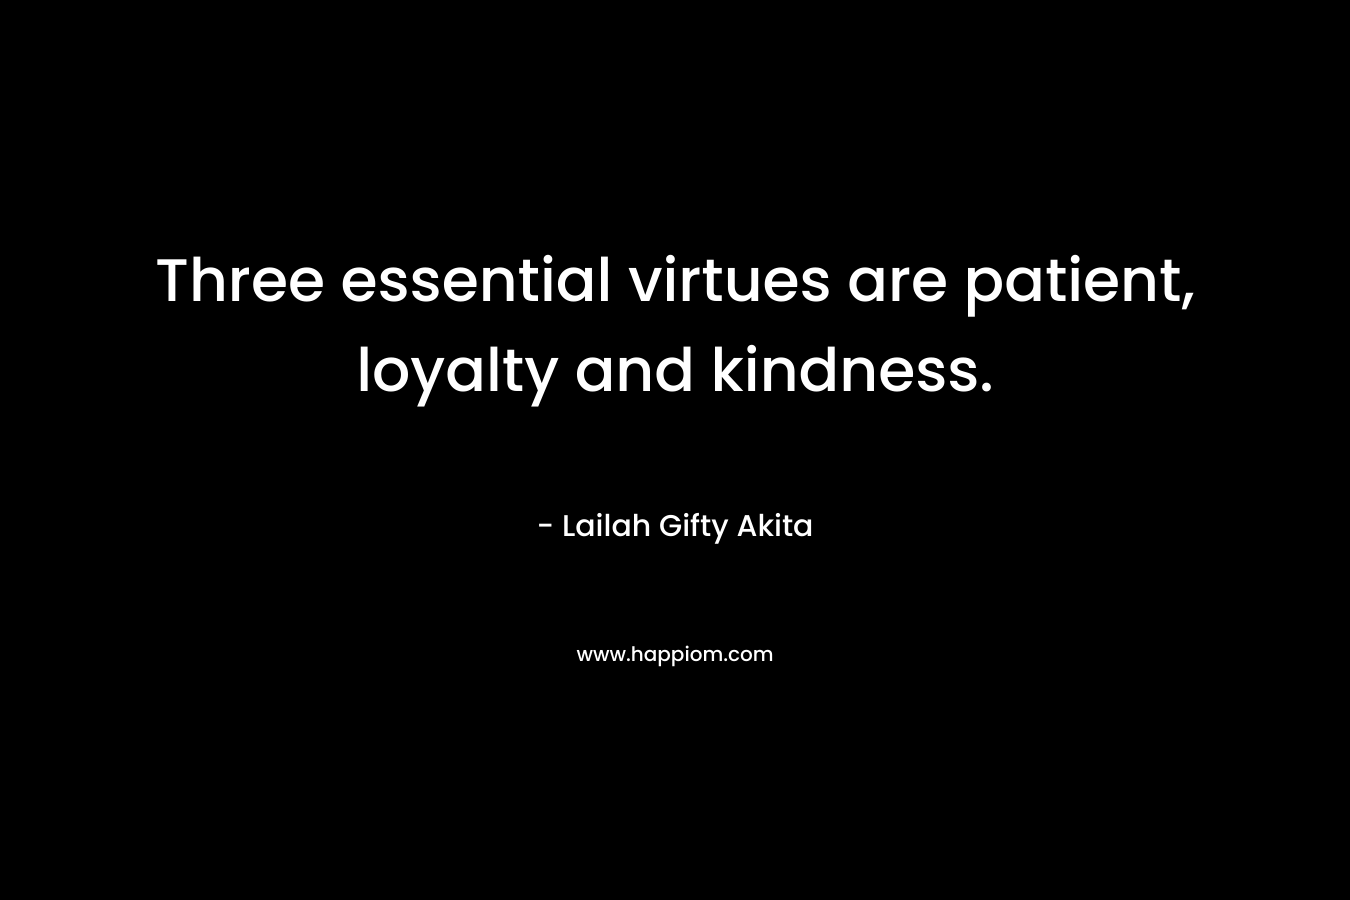 Three essential virtues are patient, loyalty and kindness.